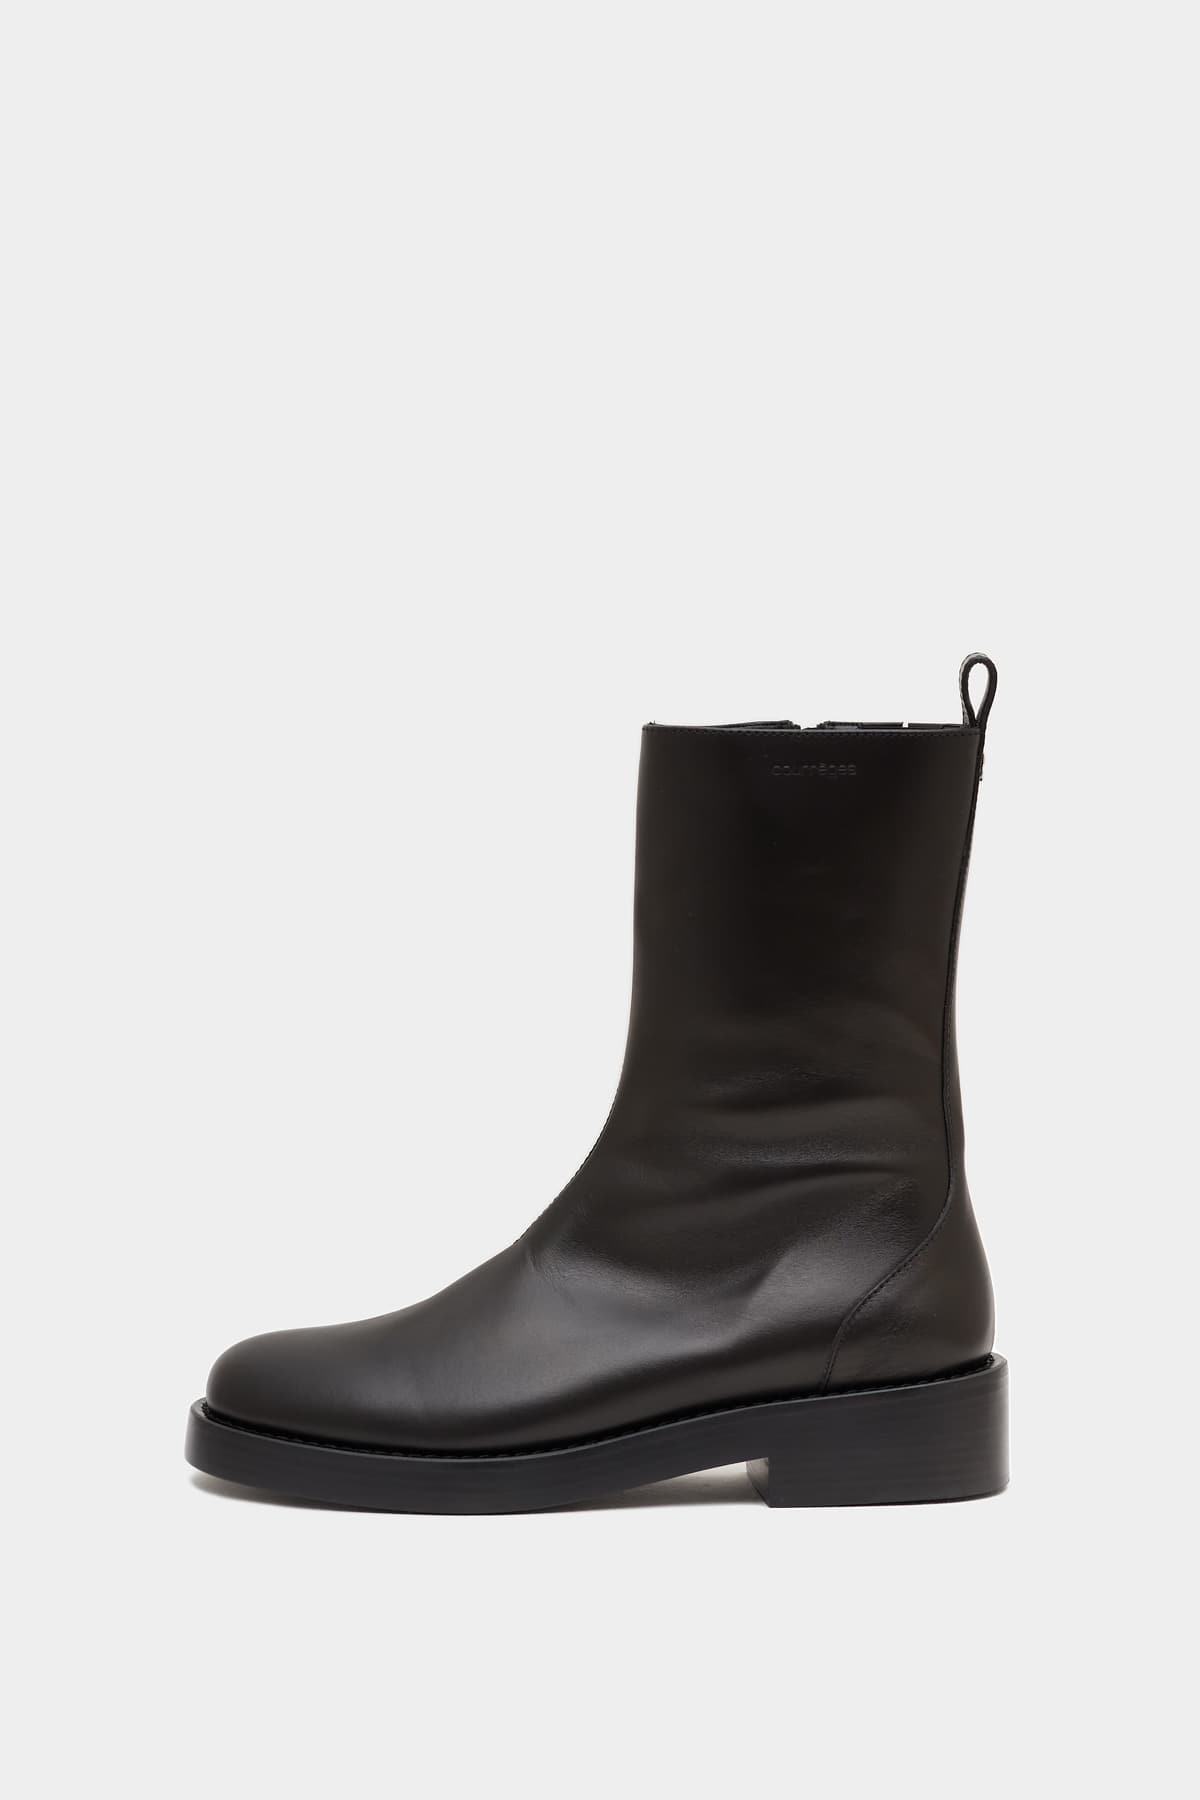 COURREGES BLACK RIDER LEATHER BOOTS IAMNUE